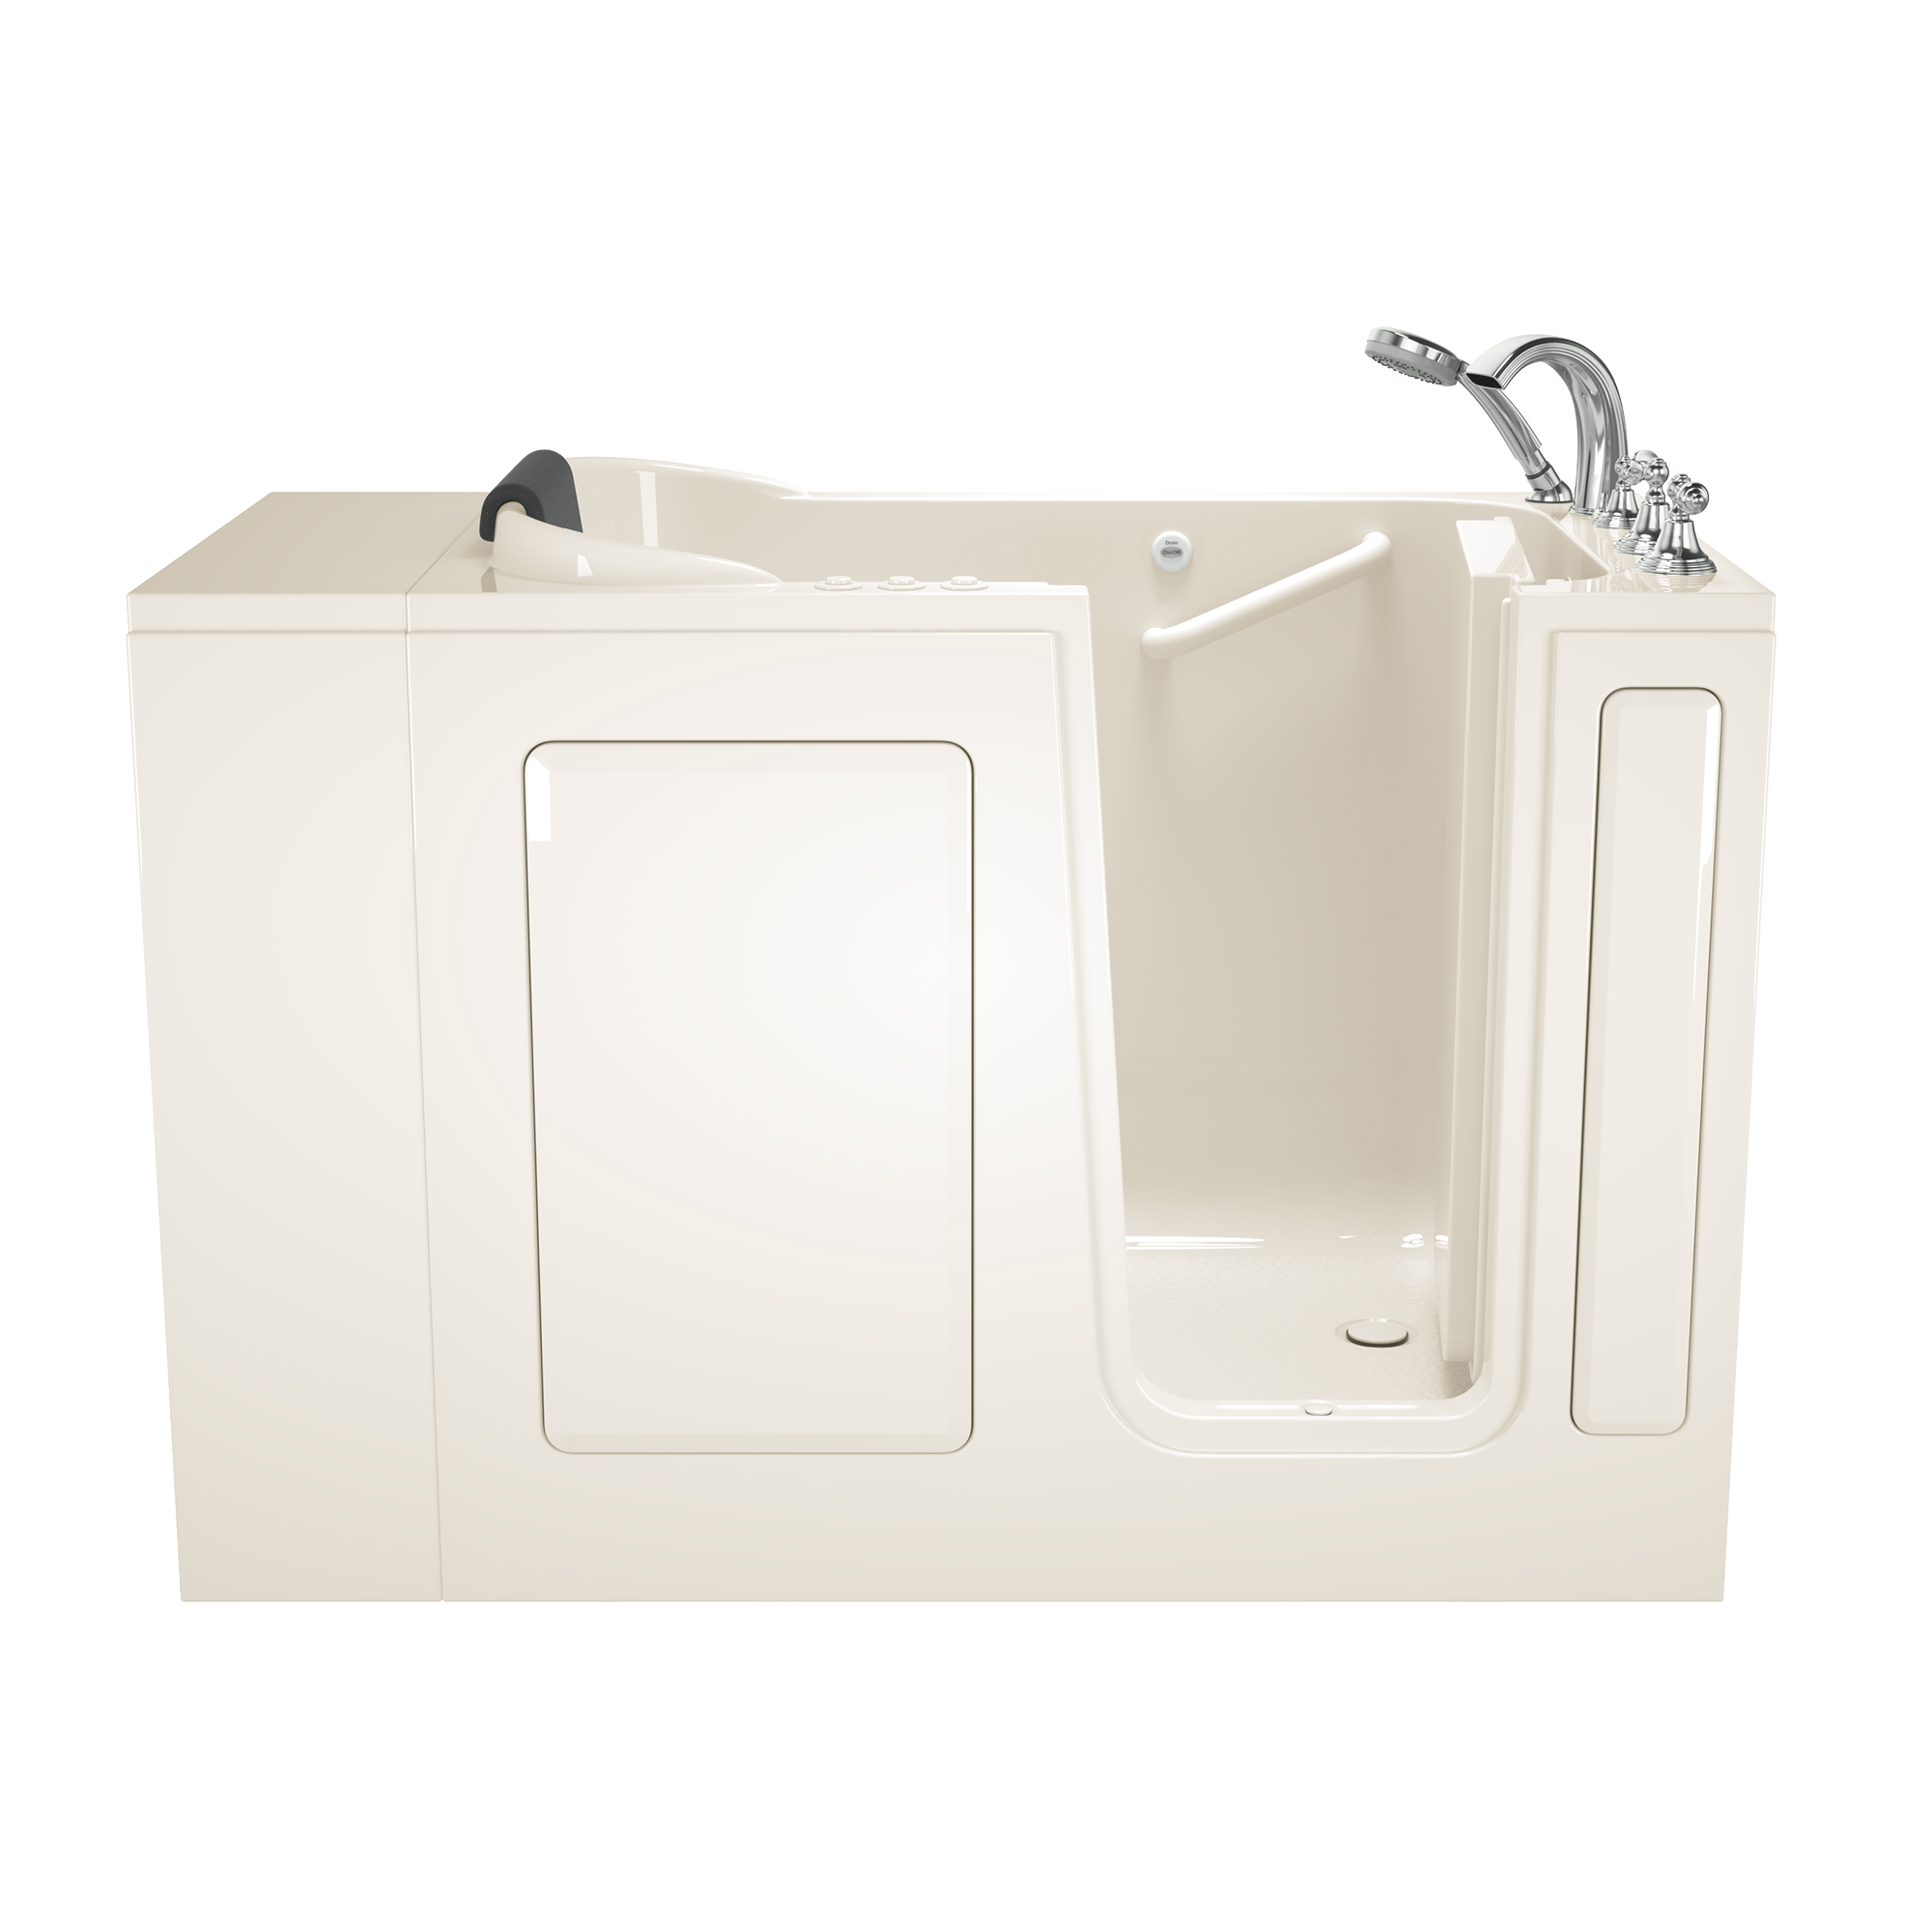 Gelcoat Premium Series 28 x 48-Inch Walk-in Tub With Combination Air Spa and Whirlpool Systems - Right-Hand Drain With Faucet